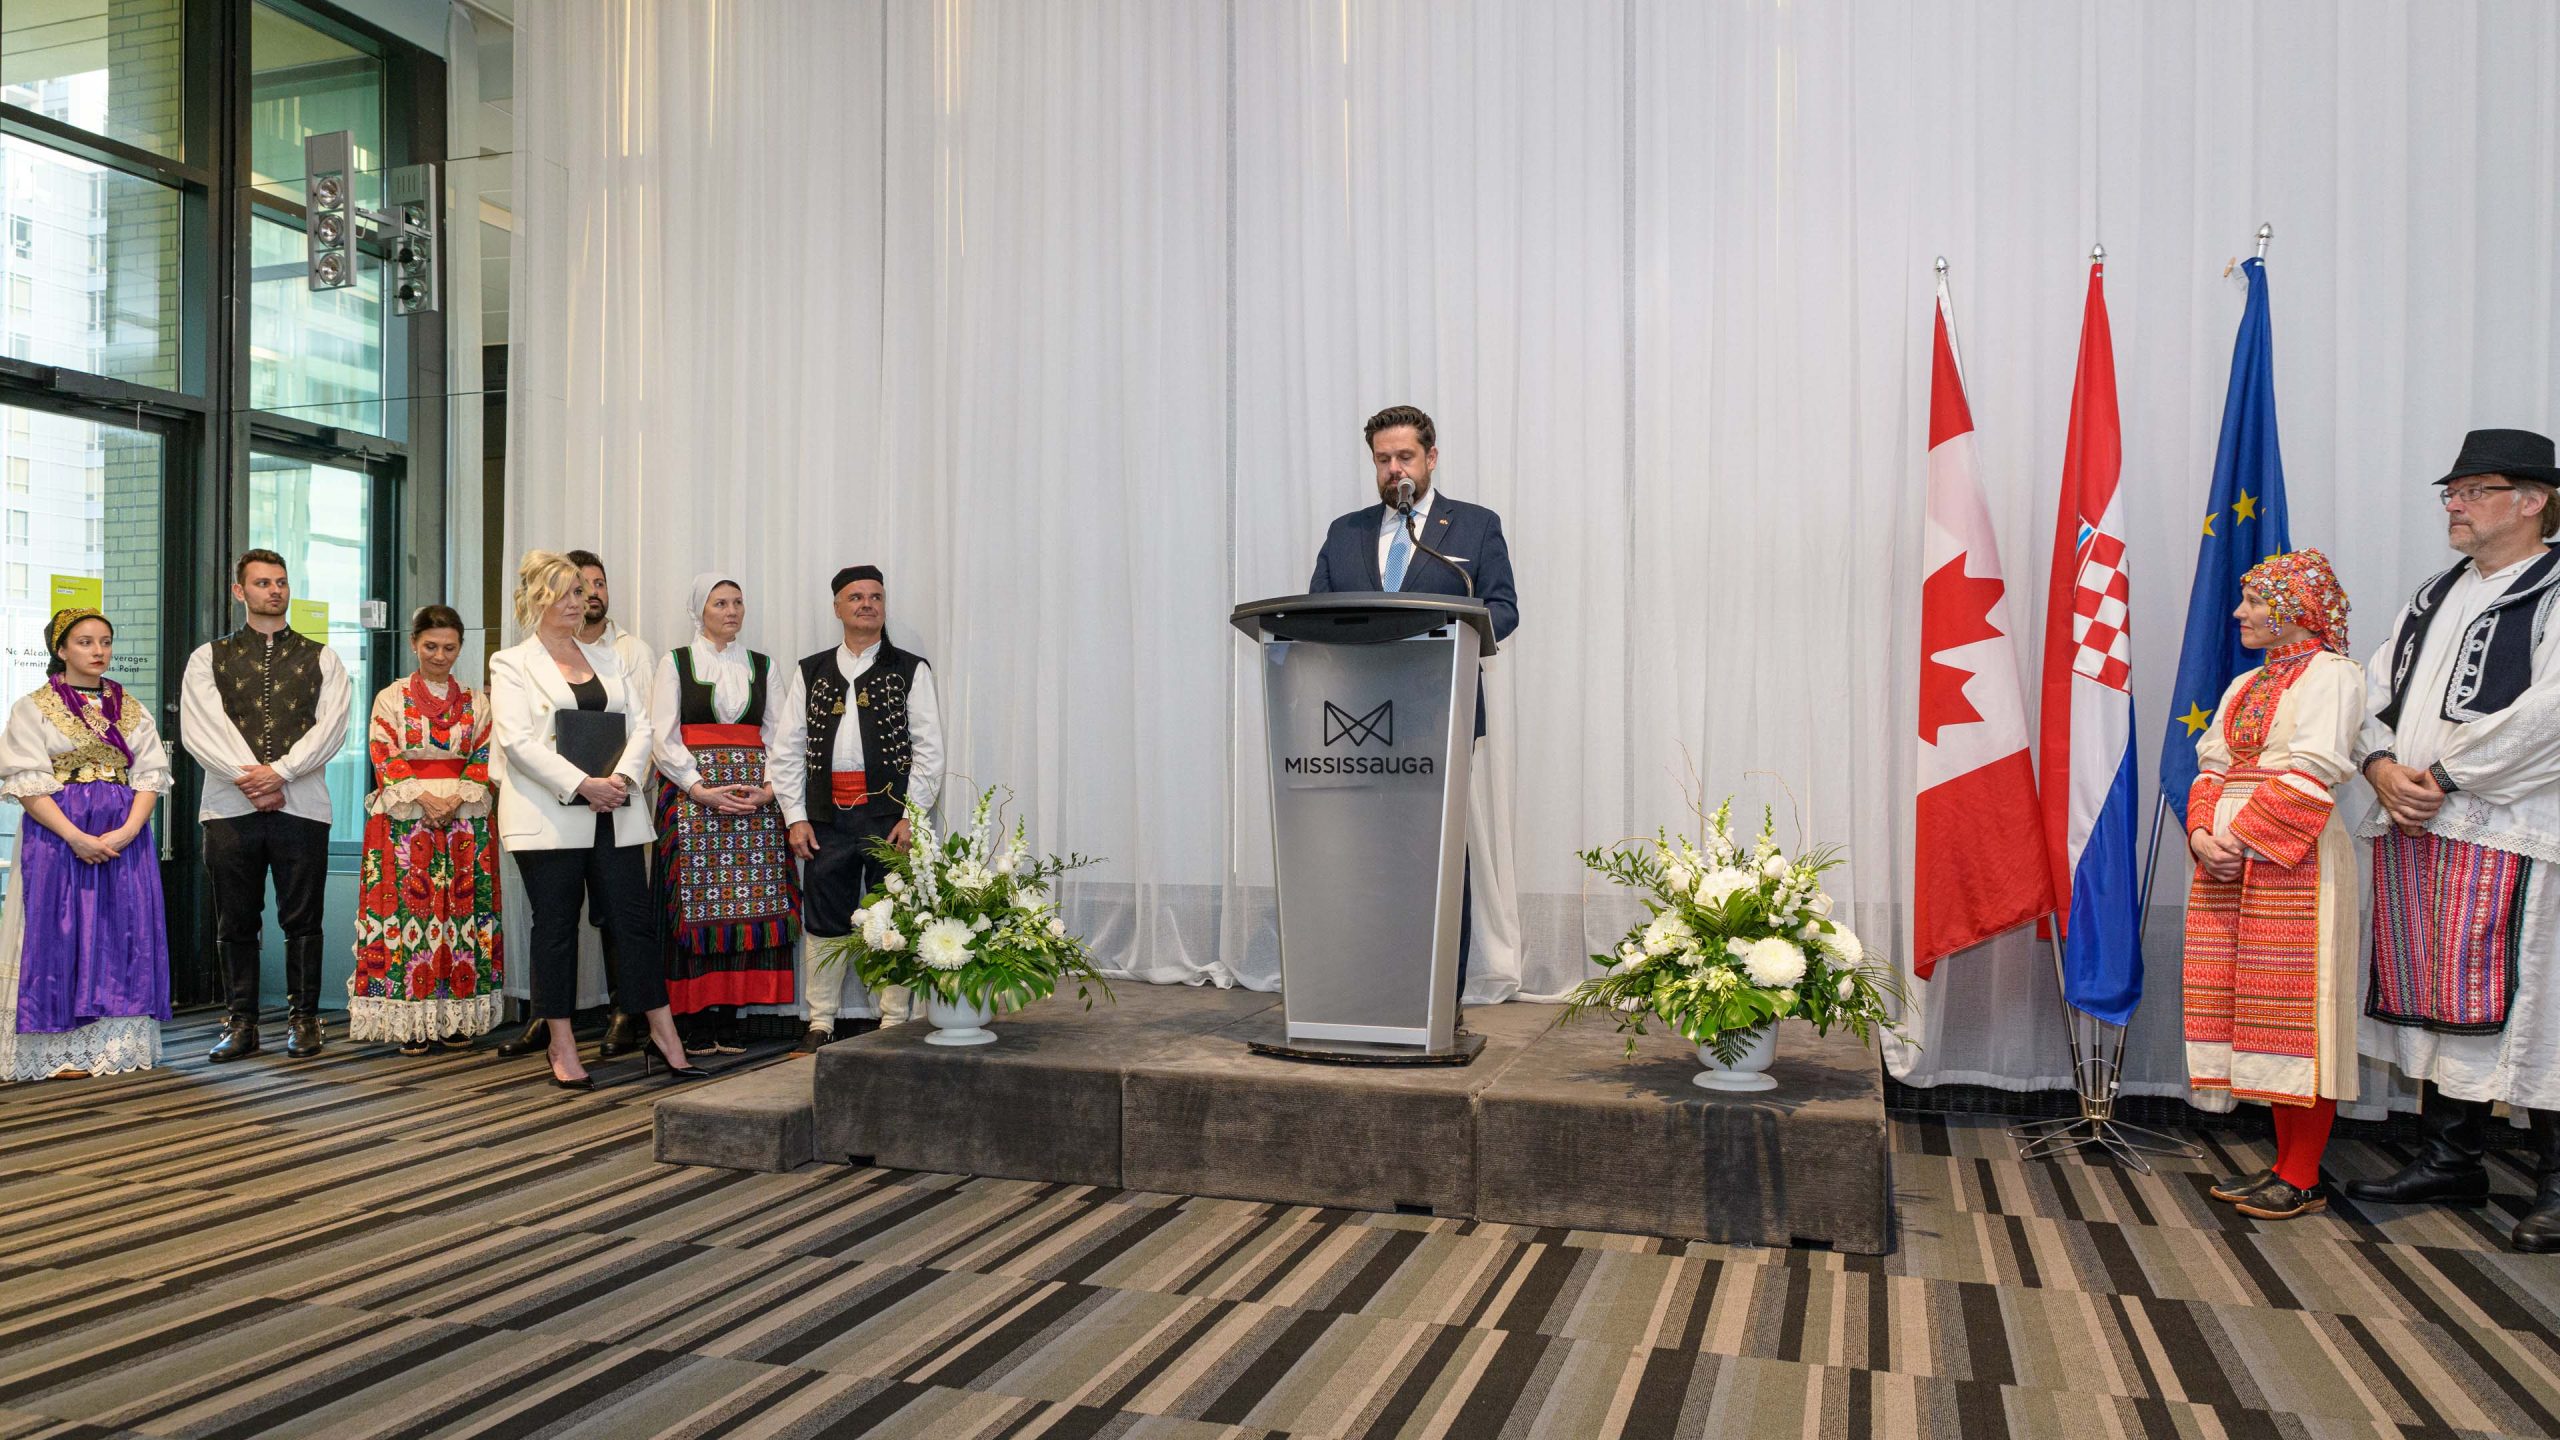 Croatian Statehood Day celebrated in Ontario with Grand Commemoration
